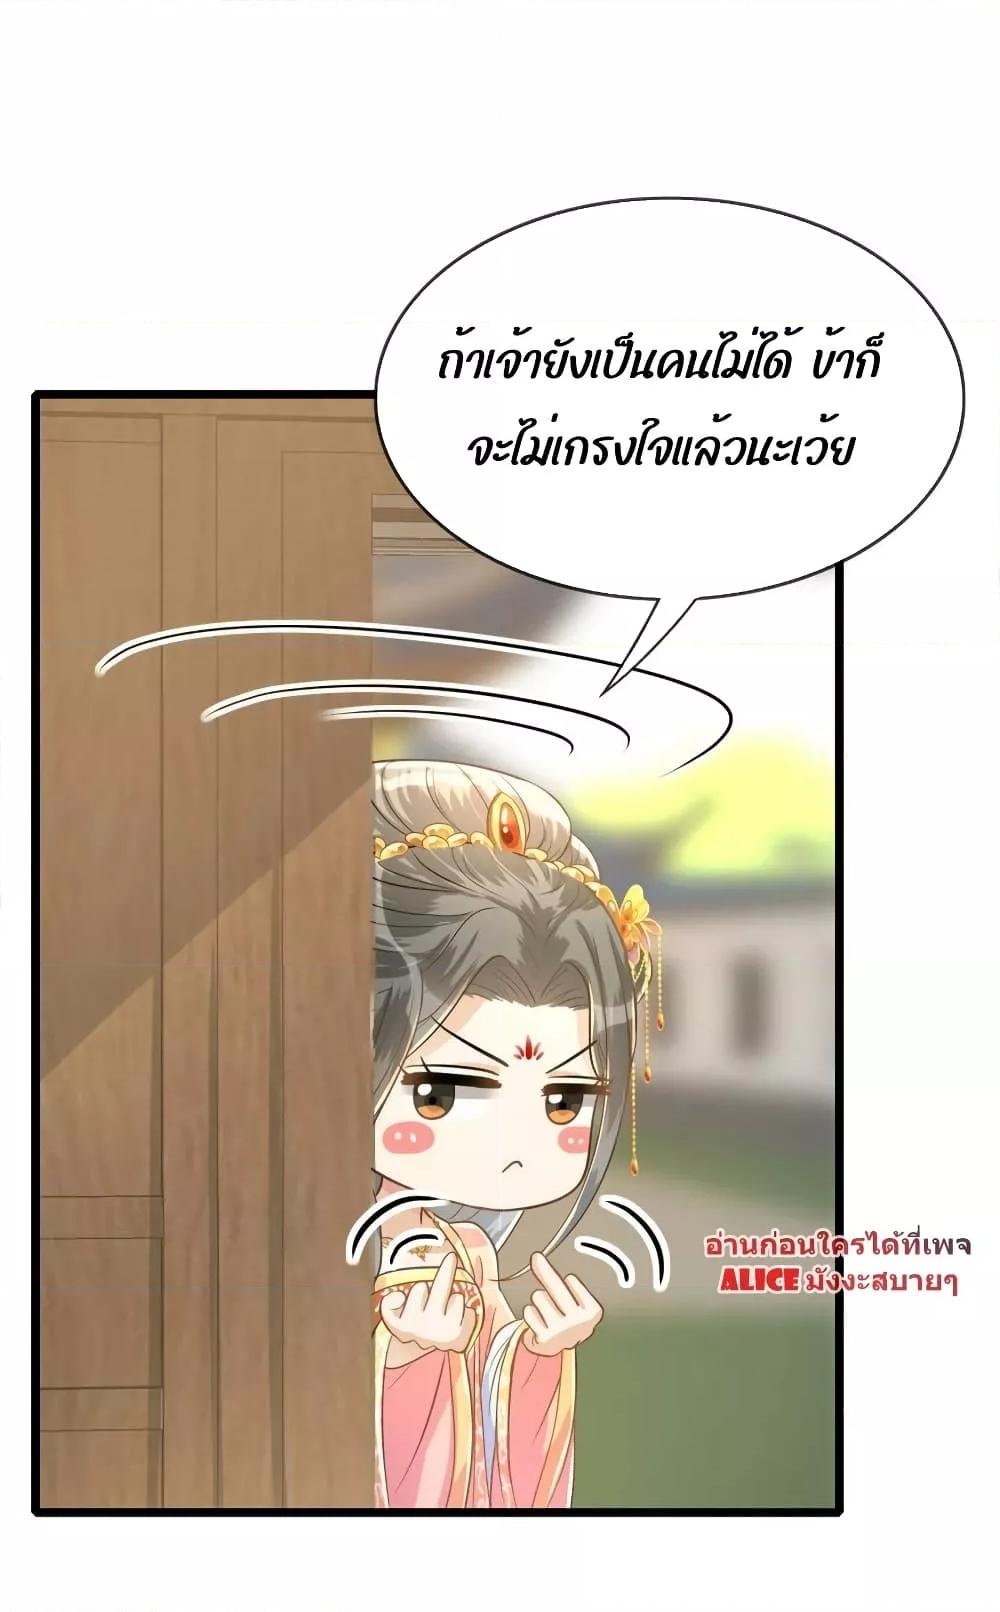 But what if His Royal Highness is the substitute โ€“ เธซเธฒเธเน€เธเธฒเน€เธเนเธเนเธเนเธ•เธฑเธงเนเธ—เธเธญเธเธเนเธฃเธฑเธเธ—เธฒเธขเธฒเธ—เธฅเนเธฐ เธ•เธญเธเธ—เธตเน 13 (31)